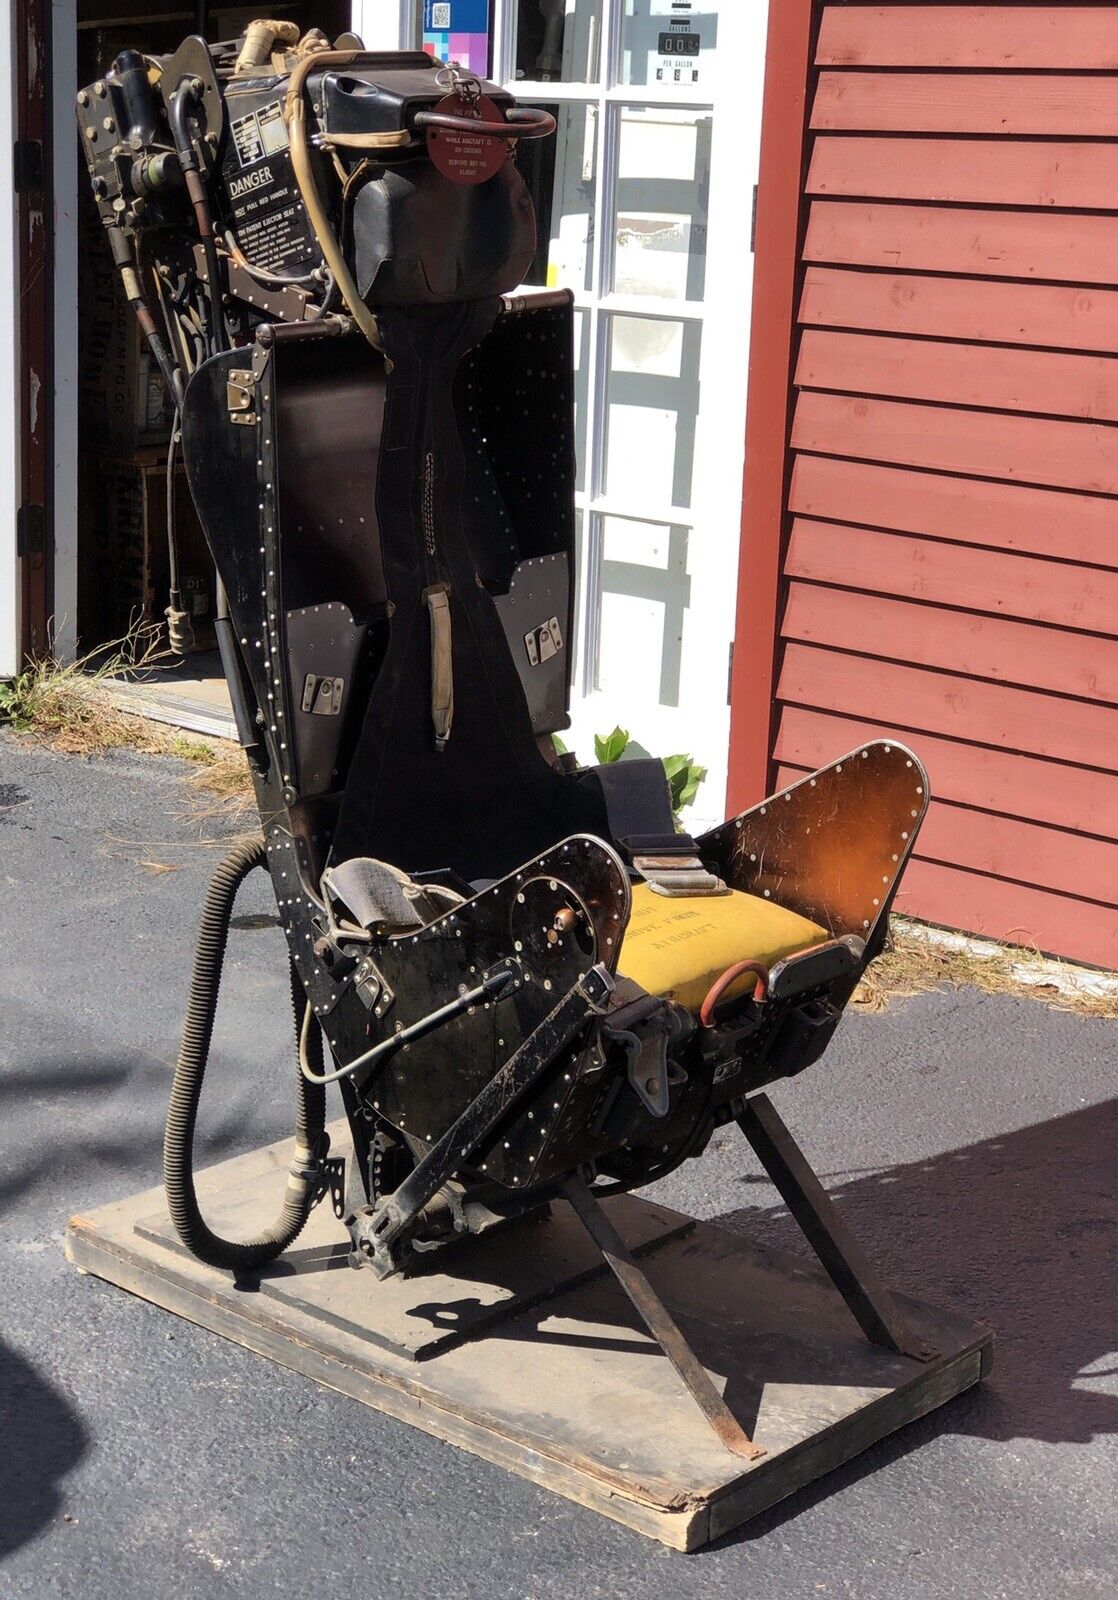 Ultra RARE Early Model Martin Baker Fighter Jet Plane Ejection Chair Seat LOOK